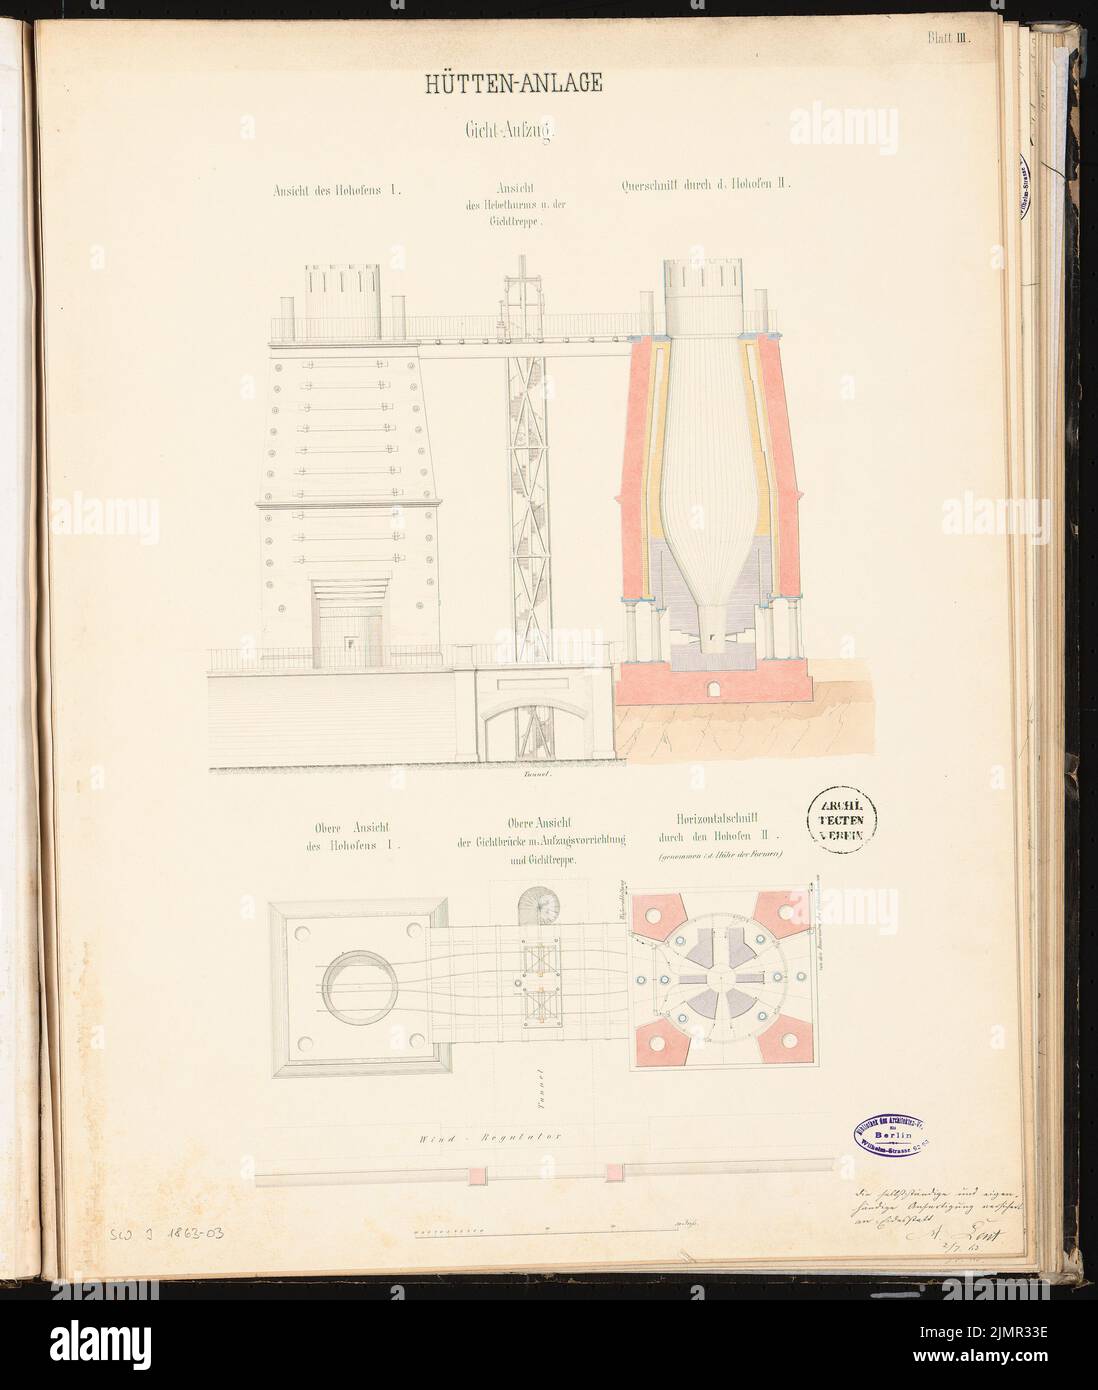 Lent Alfred (1836-1915), blast furnace system with a connecting railway. Schinkel competition 1863 (1863): blast furnace: floor plan (2 levels) with gout bridge, outline side view and cross -section with elevator; Scale bar. Tusche watercolor on the box, 63.9 x 54 cm (including scan edges) Lent Alfred  (1836-1915): Hochofenanlage mit Verbindungsbahn. Schinkelwettbewerb 1863 Stock Photo